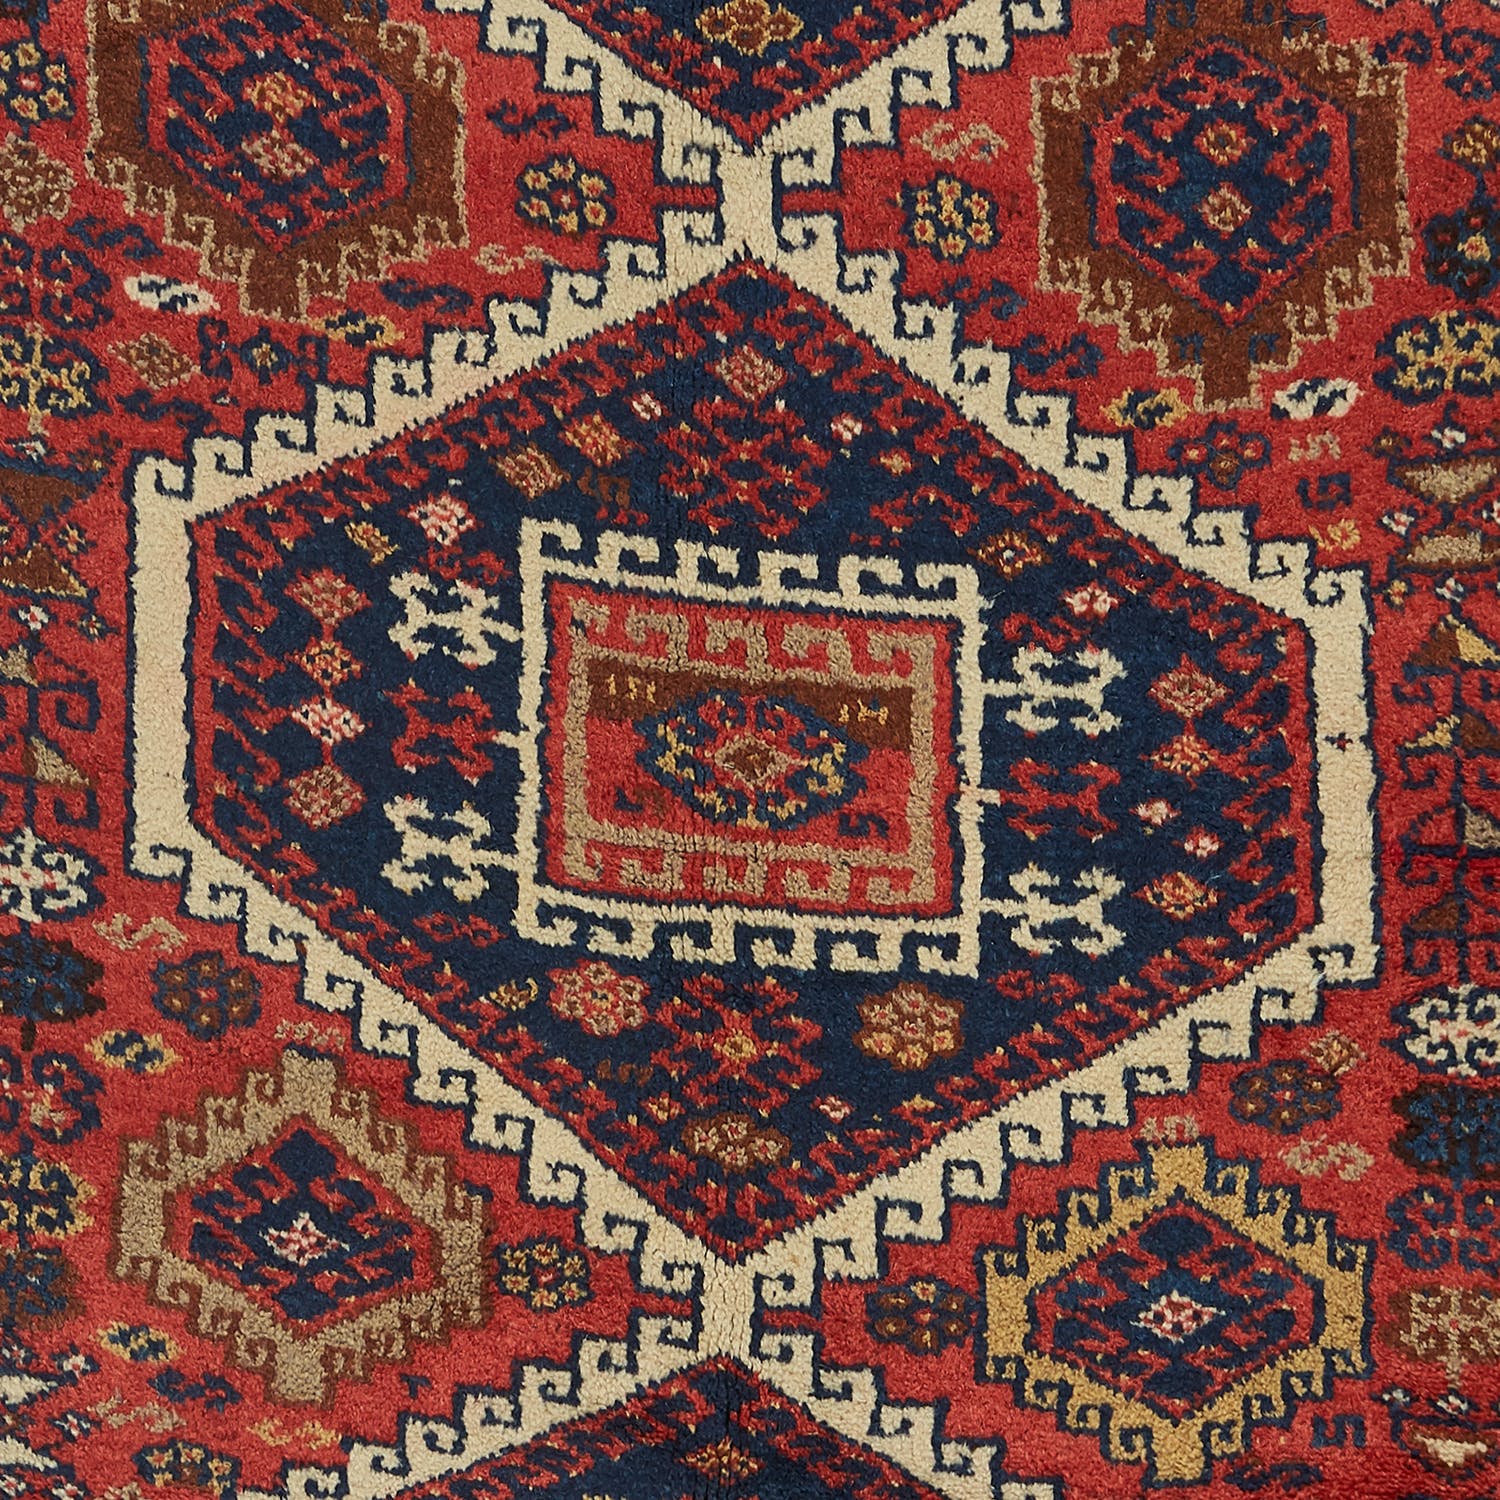 Close-up of handmade, traditional rug with intricate geometric pattern